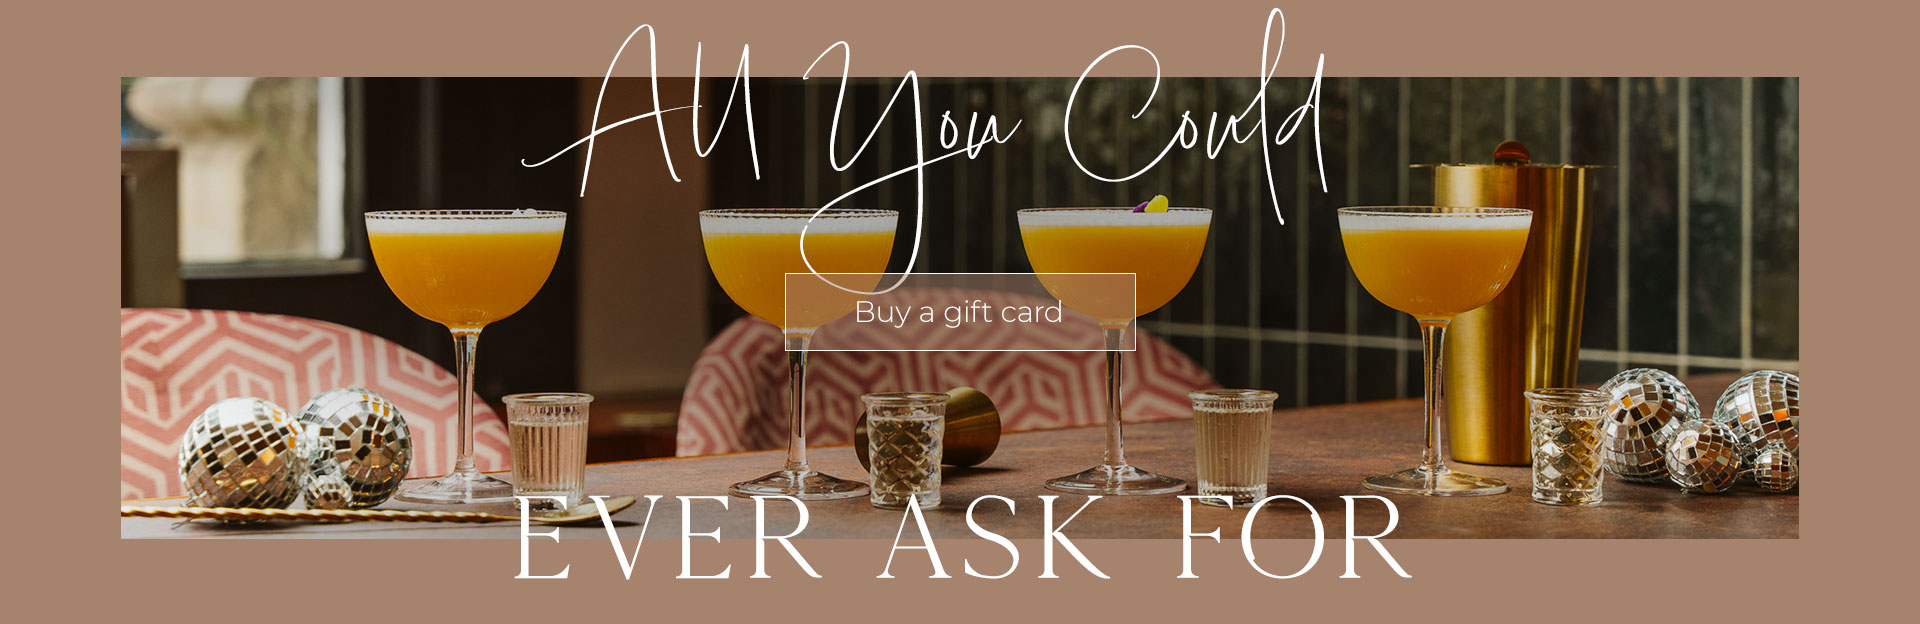 All Bar One Gift Cards at All Bar One Cheltenham